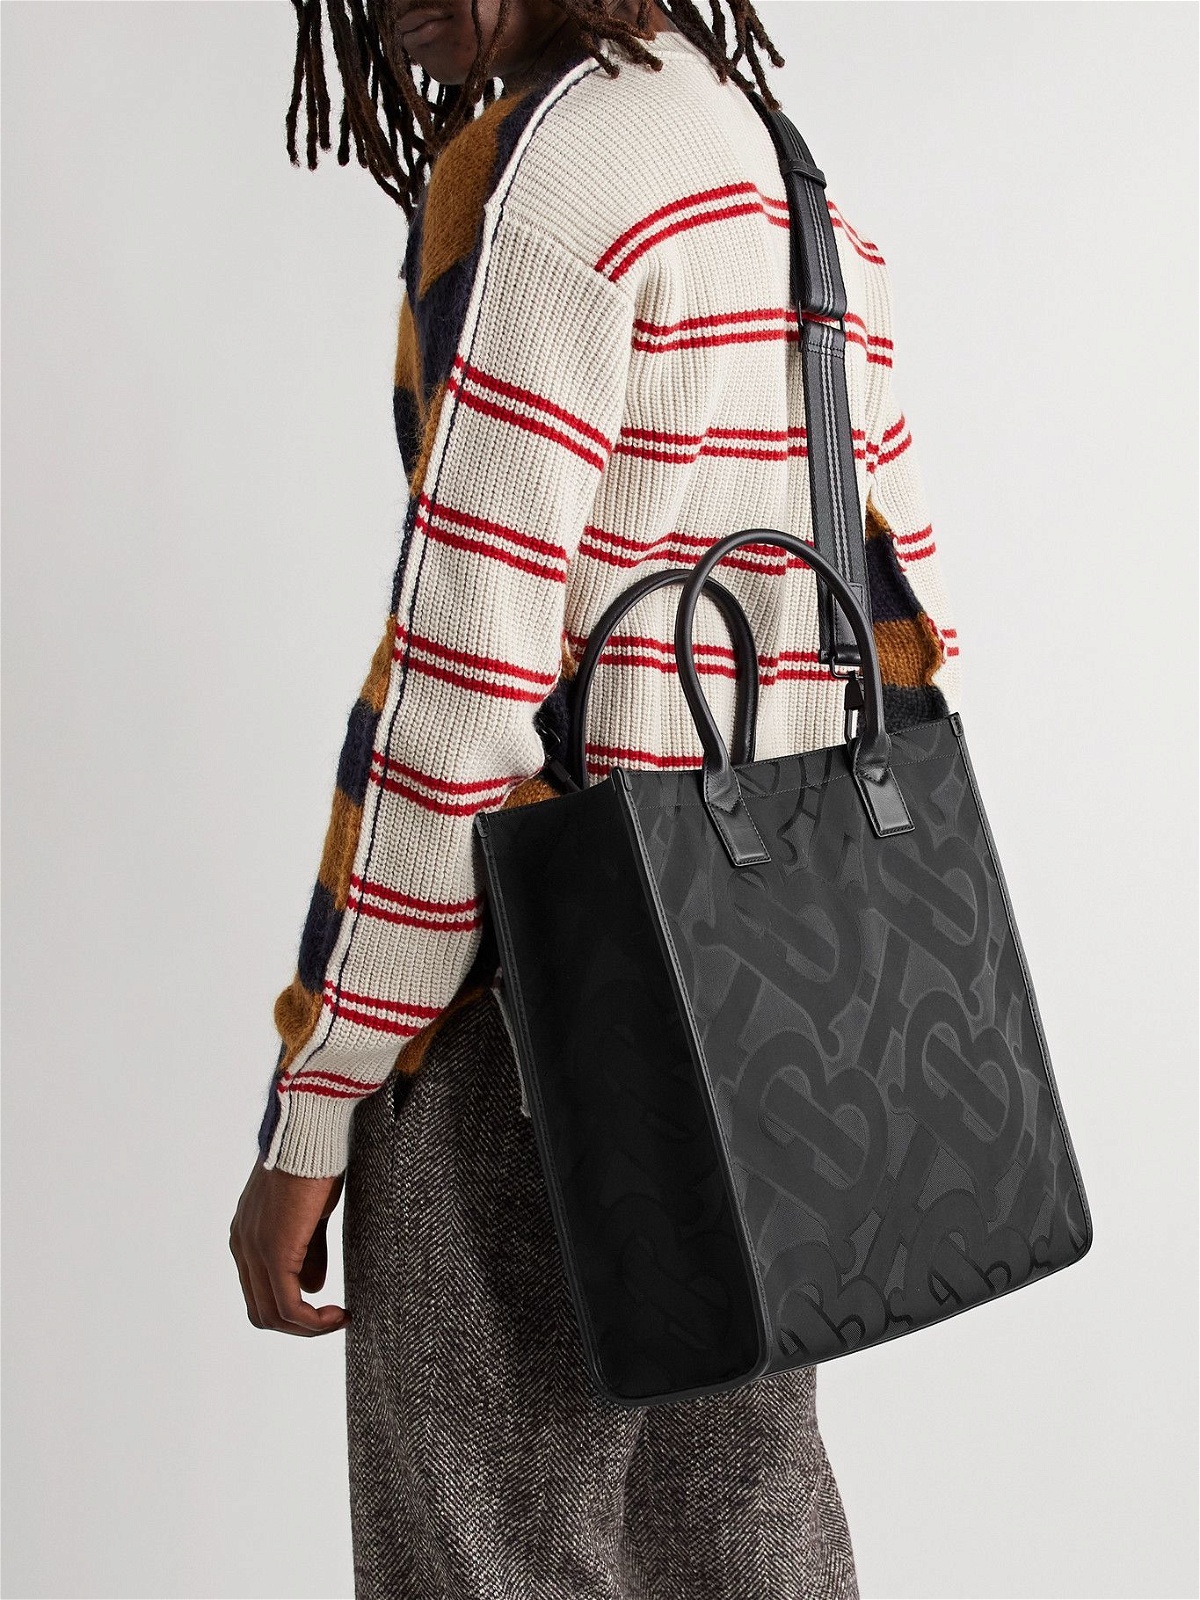 leather burberry tote